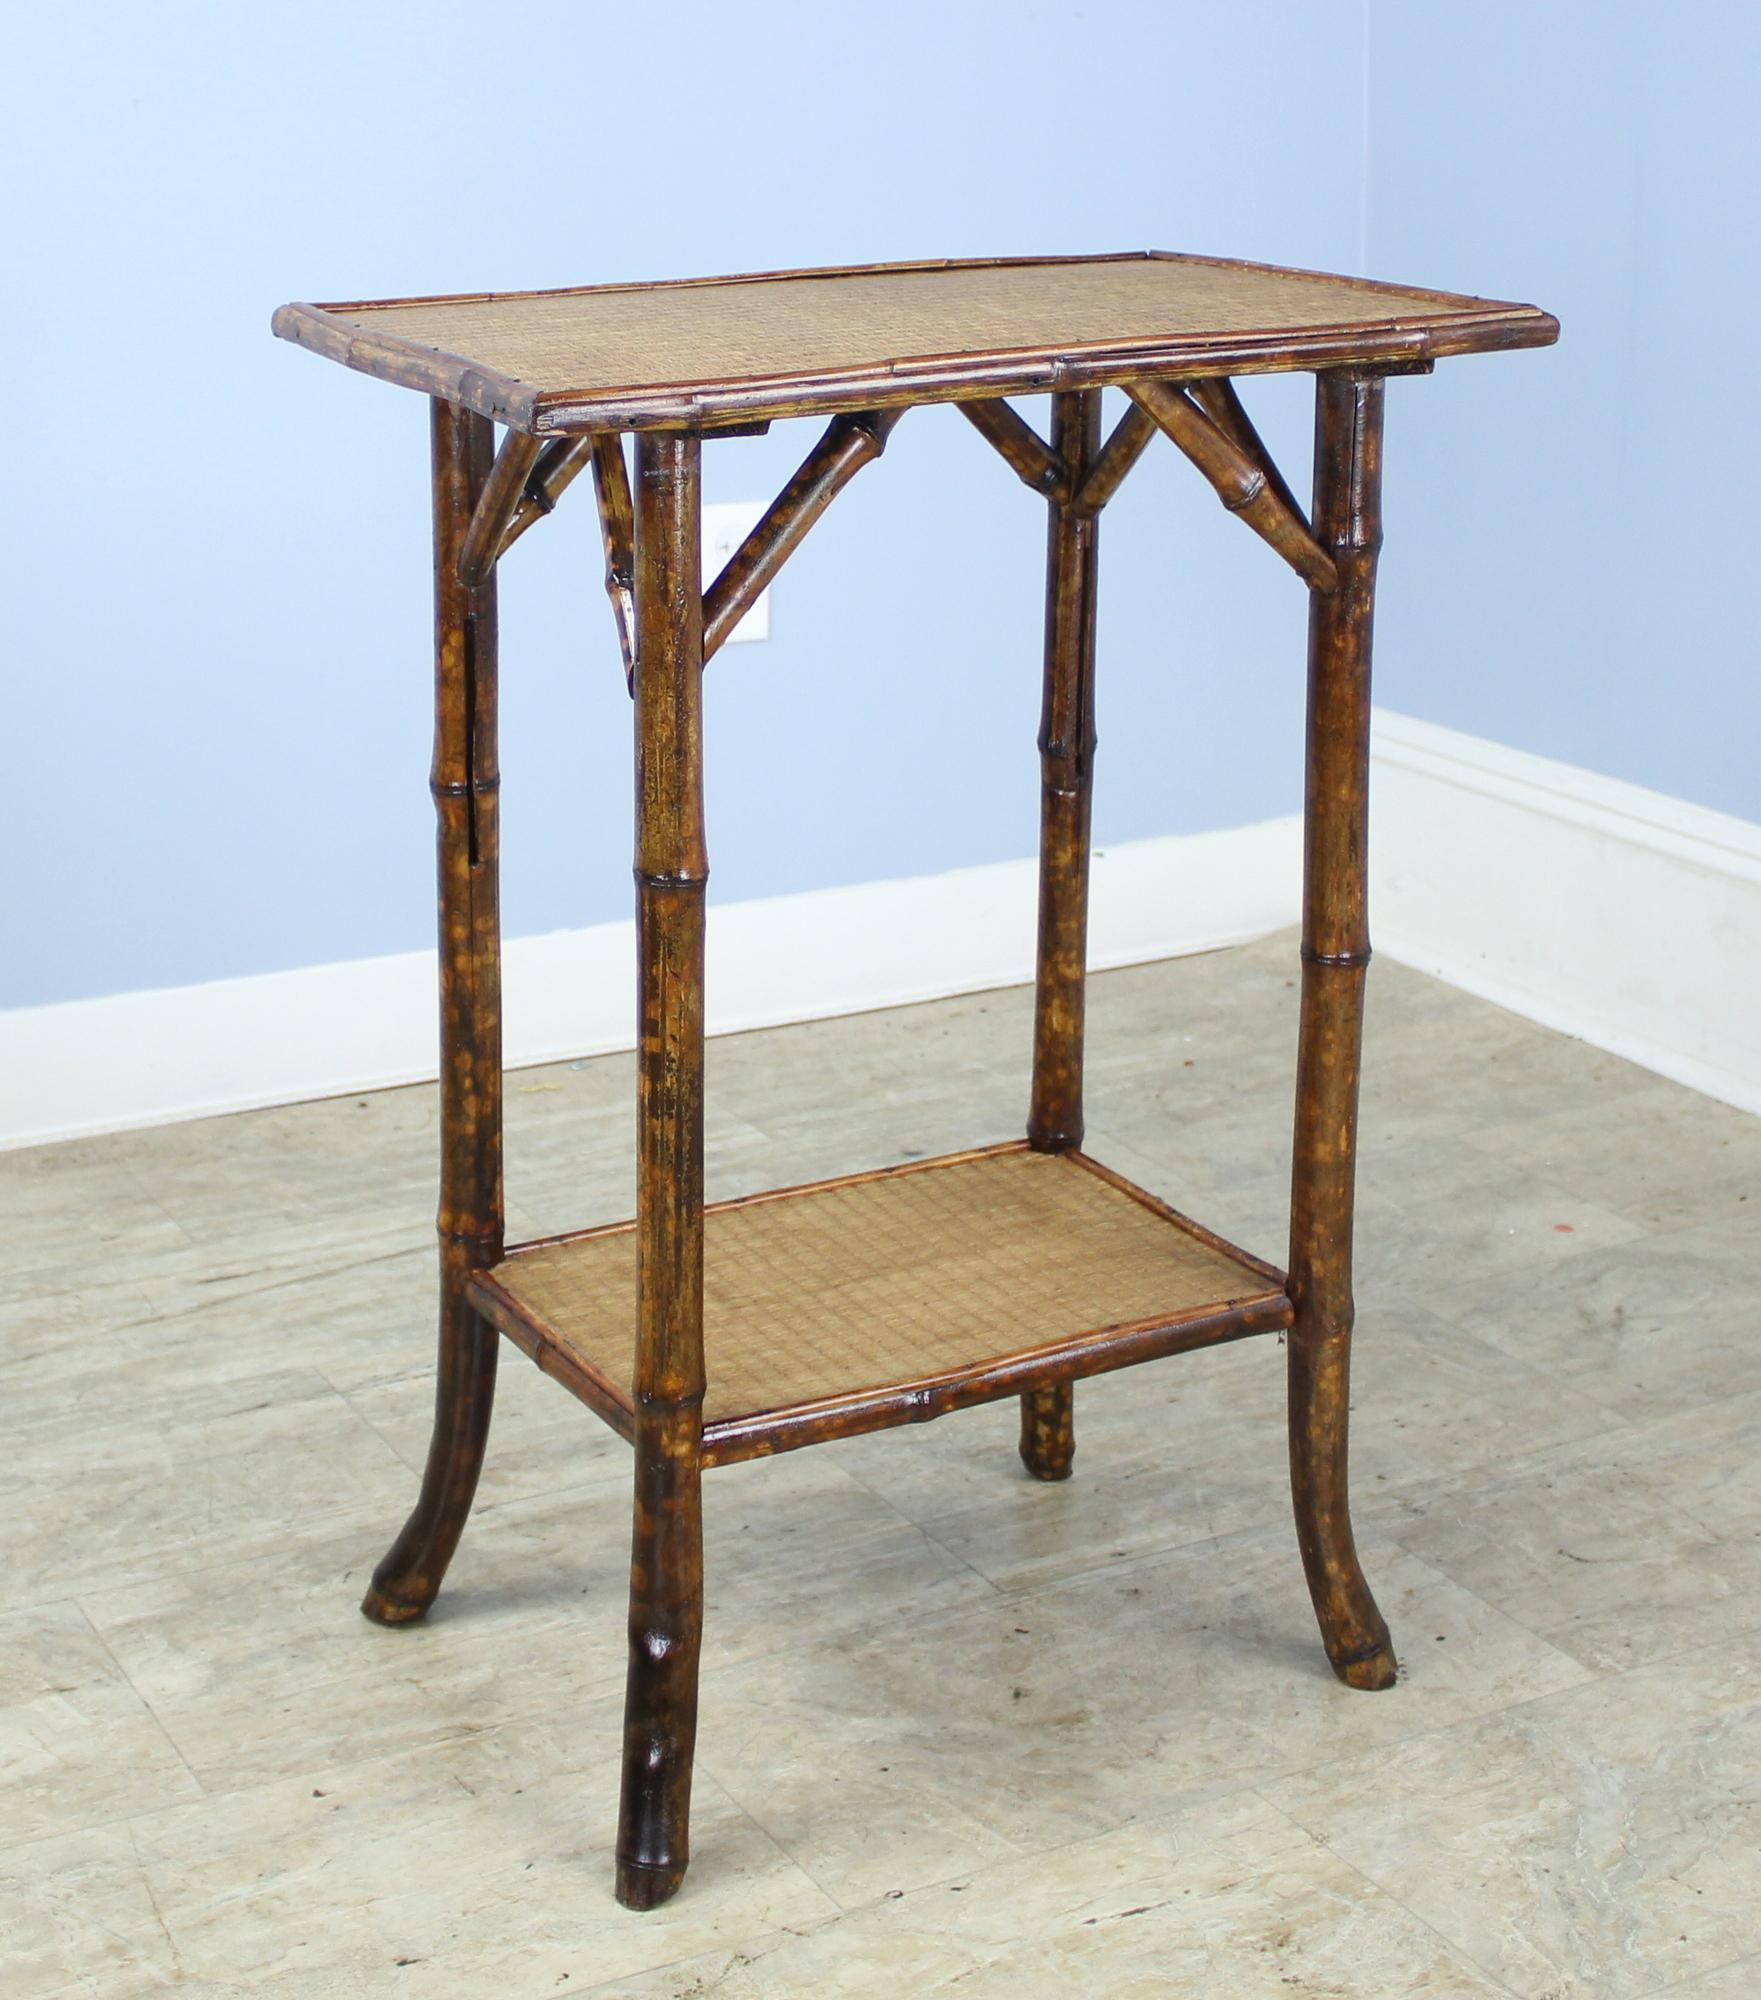 An antique English bamboo side table, with flared legs and with two shelves. Both shelves are made of tightly woven rush that is in very good condition. The bamboo, vividly painted, is in good sturdy condition. Charming as an end or lamp table.